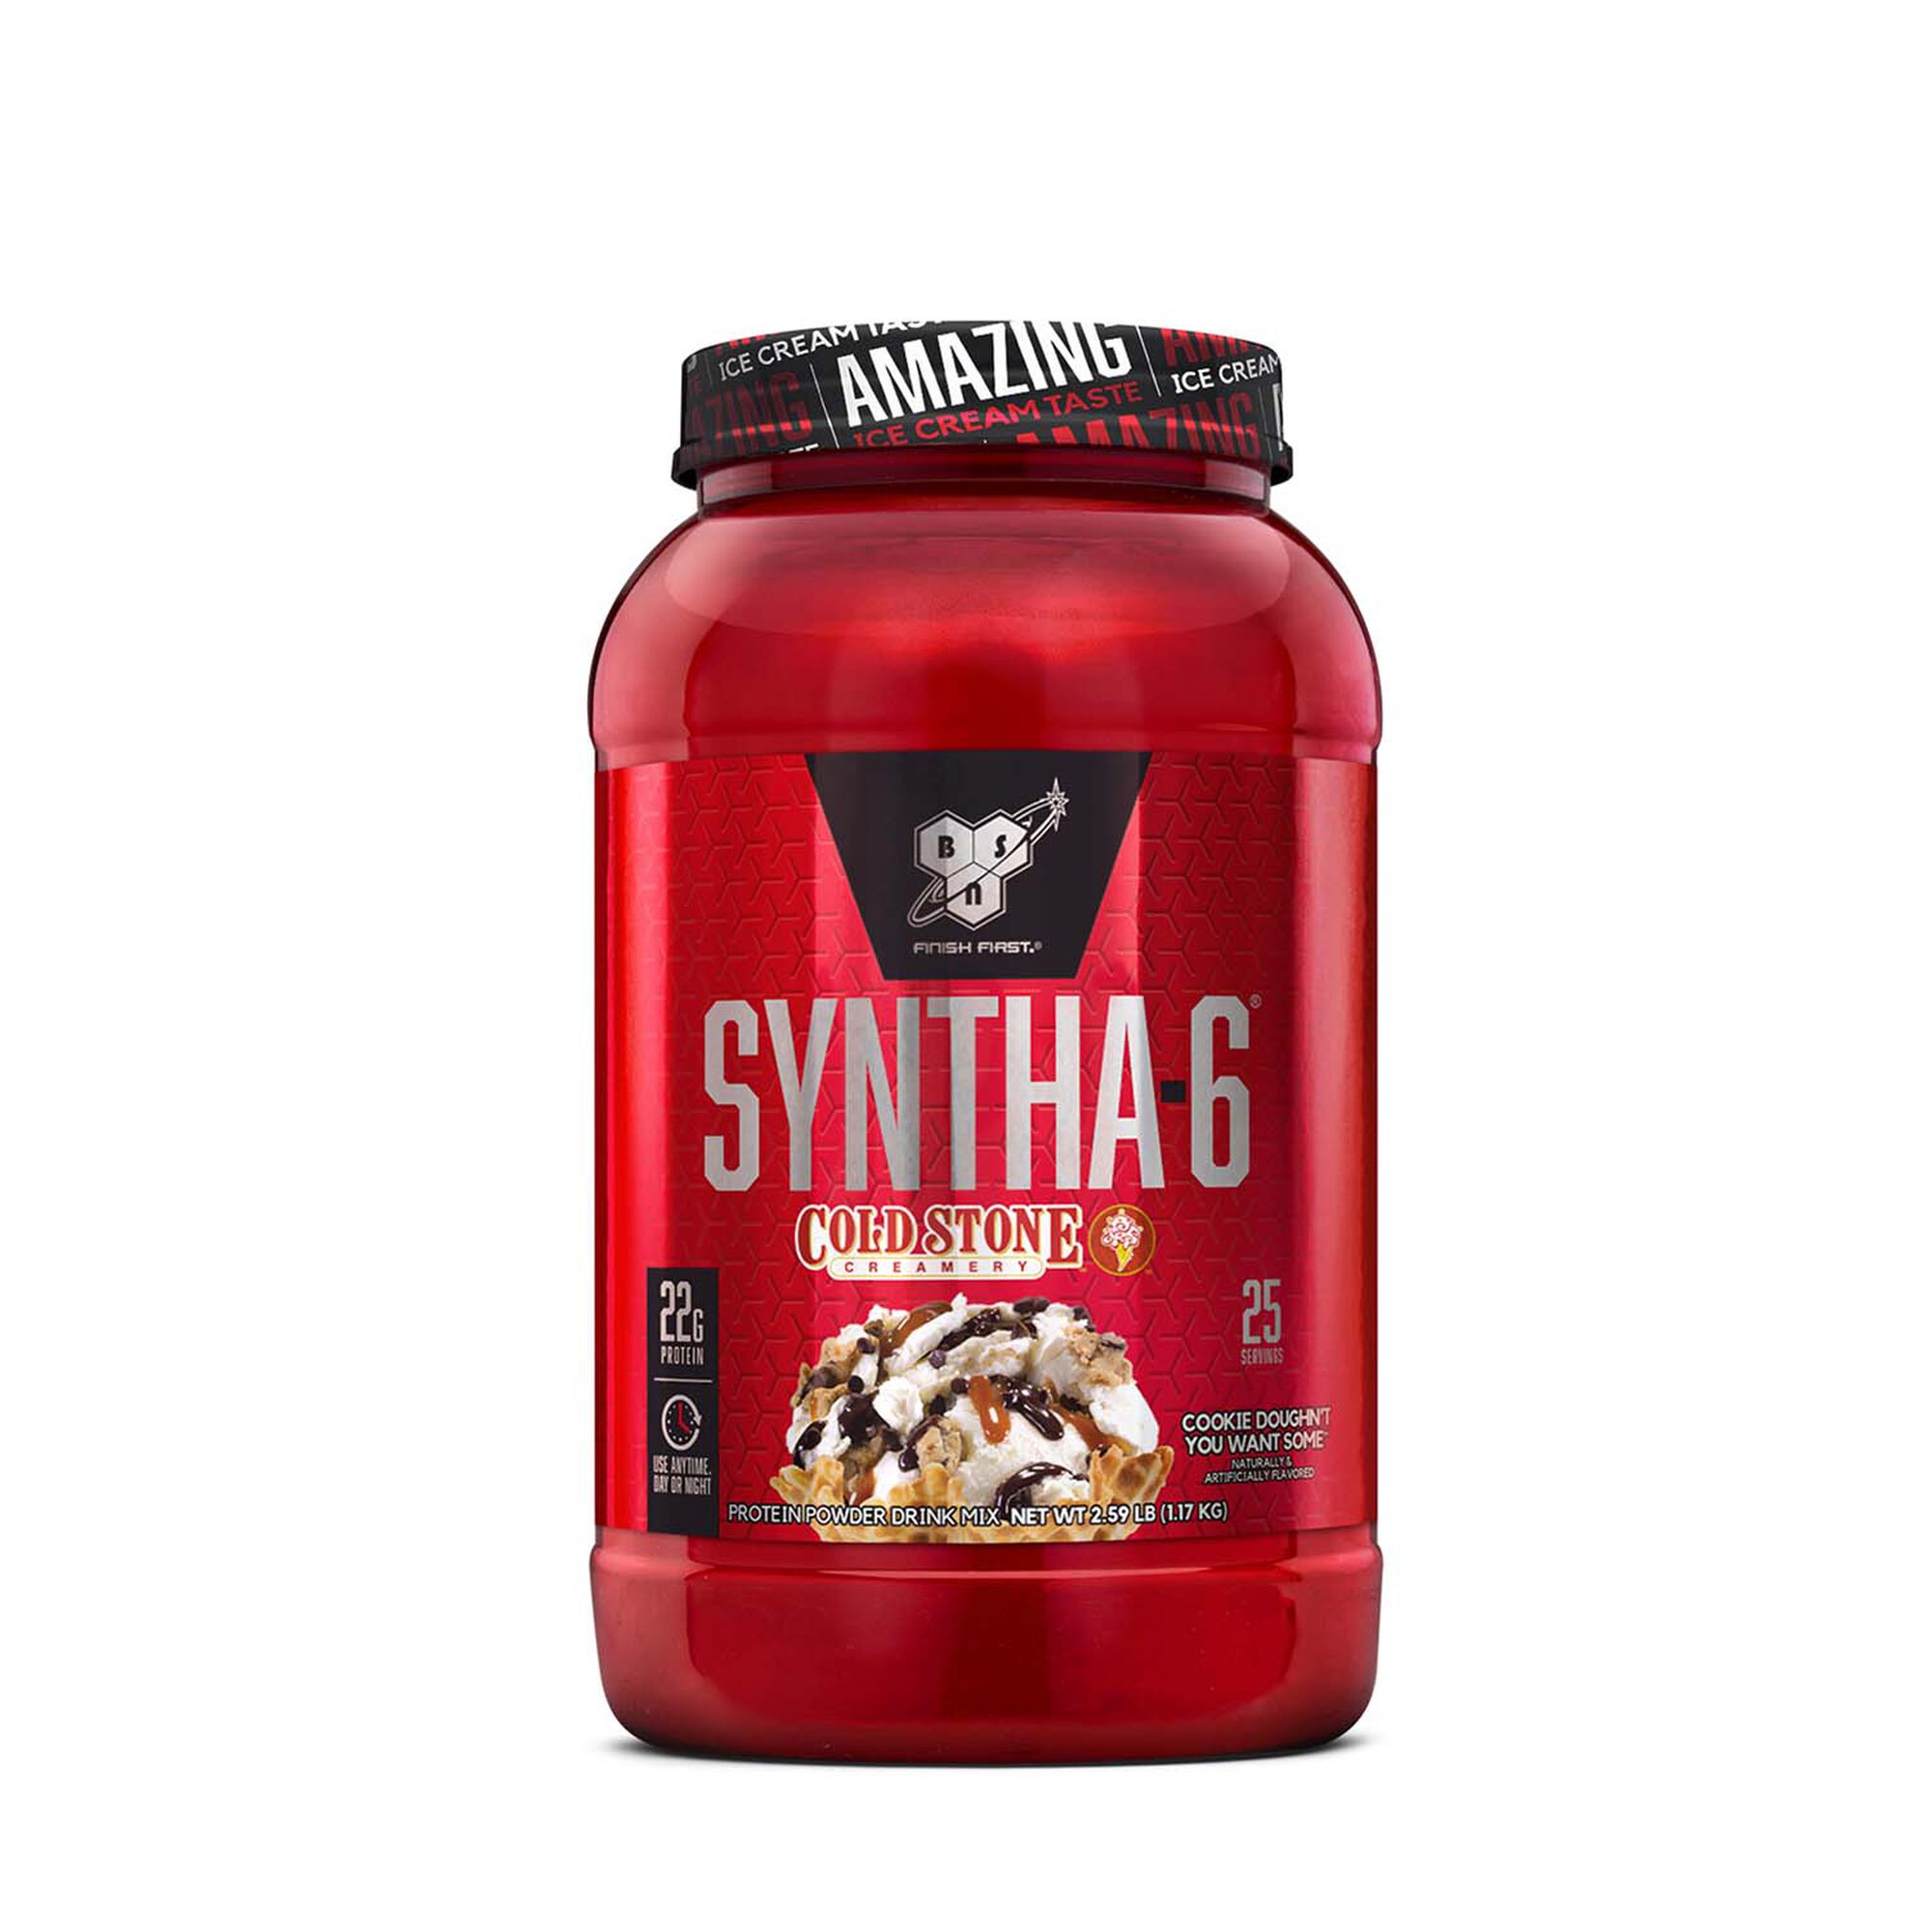 Bsn Syntha 6 Cold Stone Creamery Cookie Doughn T You Want Some Gnc